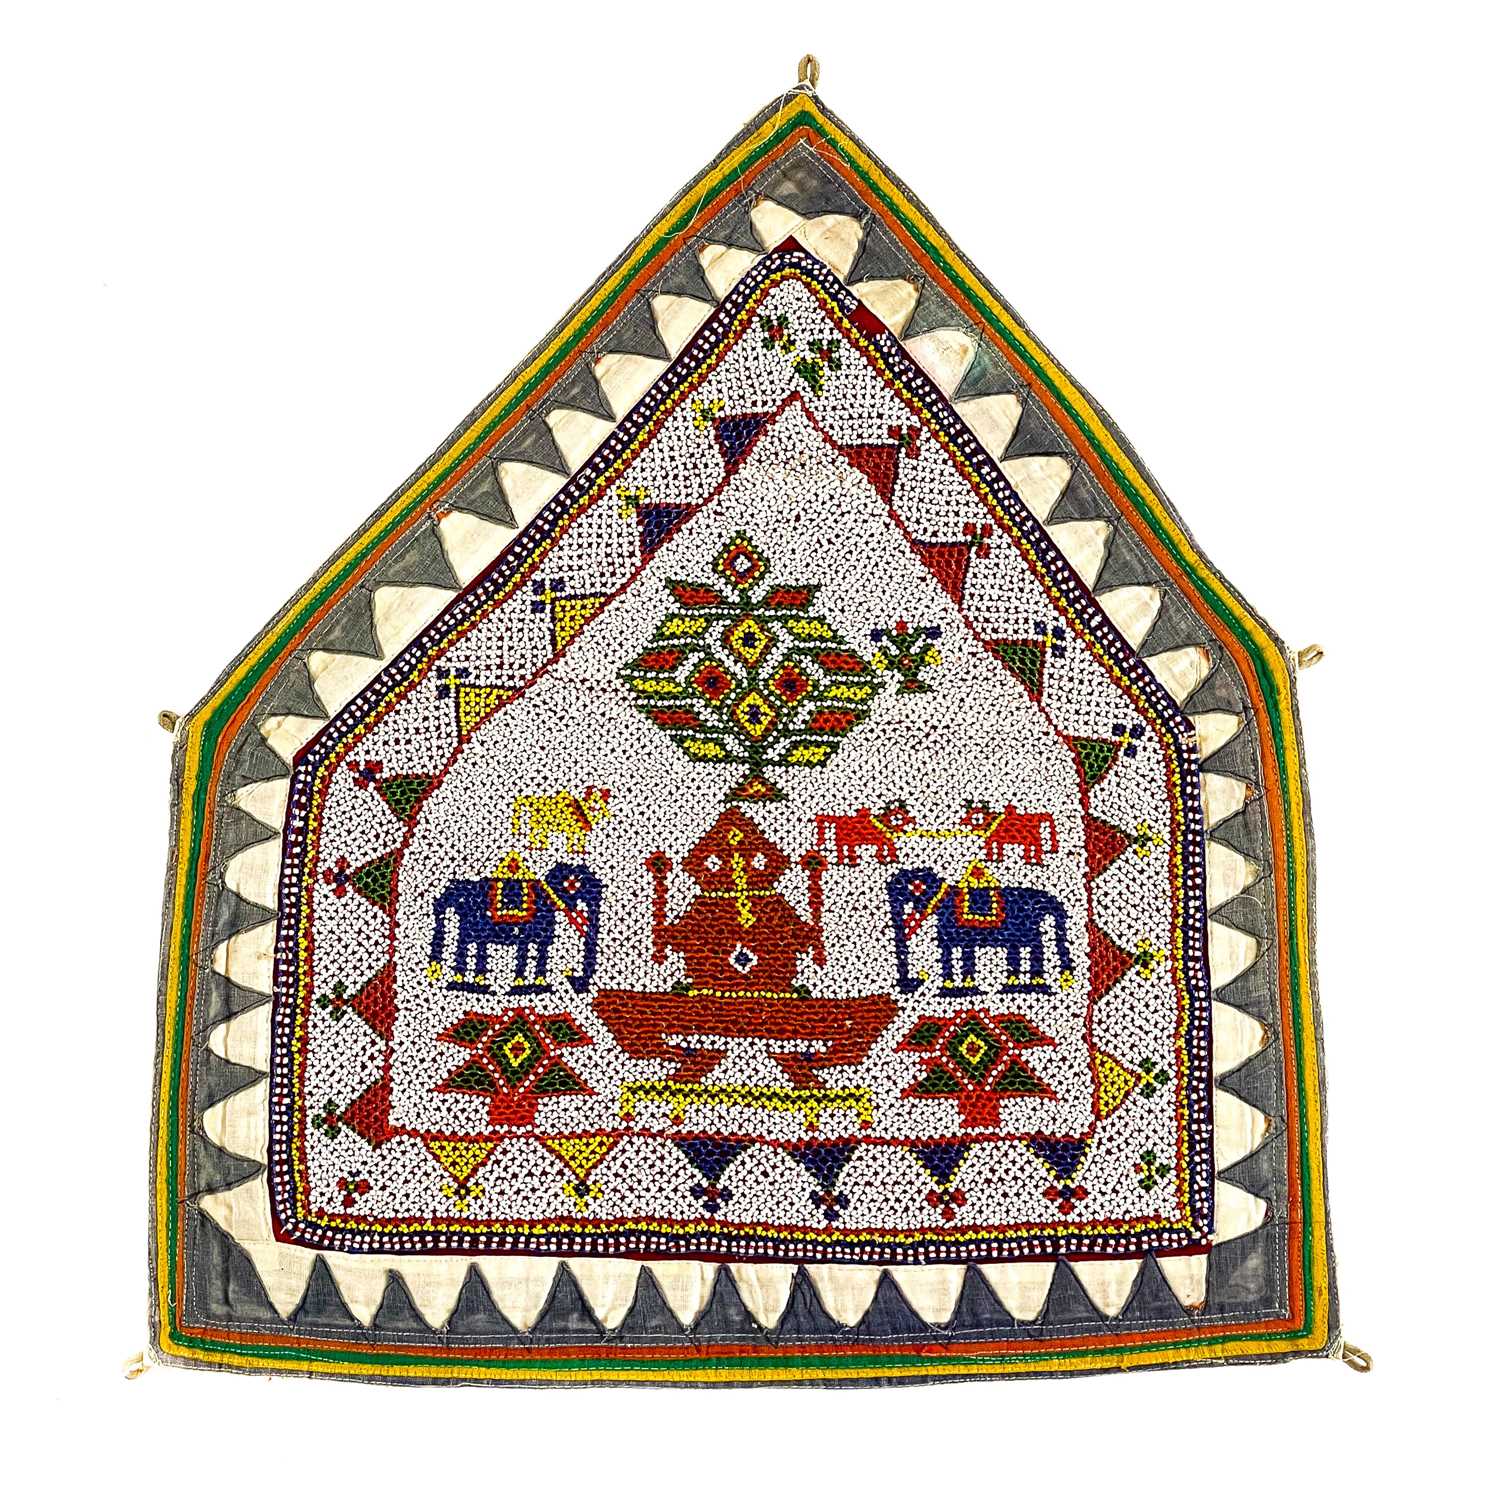 Lot 62 - An Indian beaded wedding panel, early-mid 20th century.